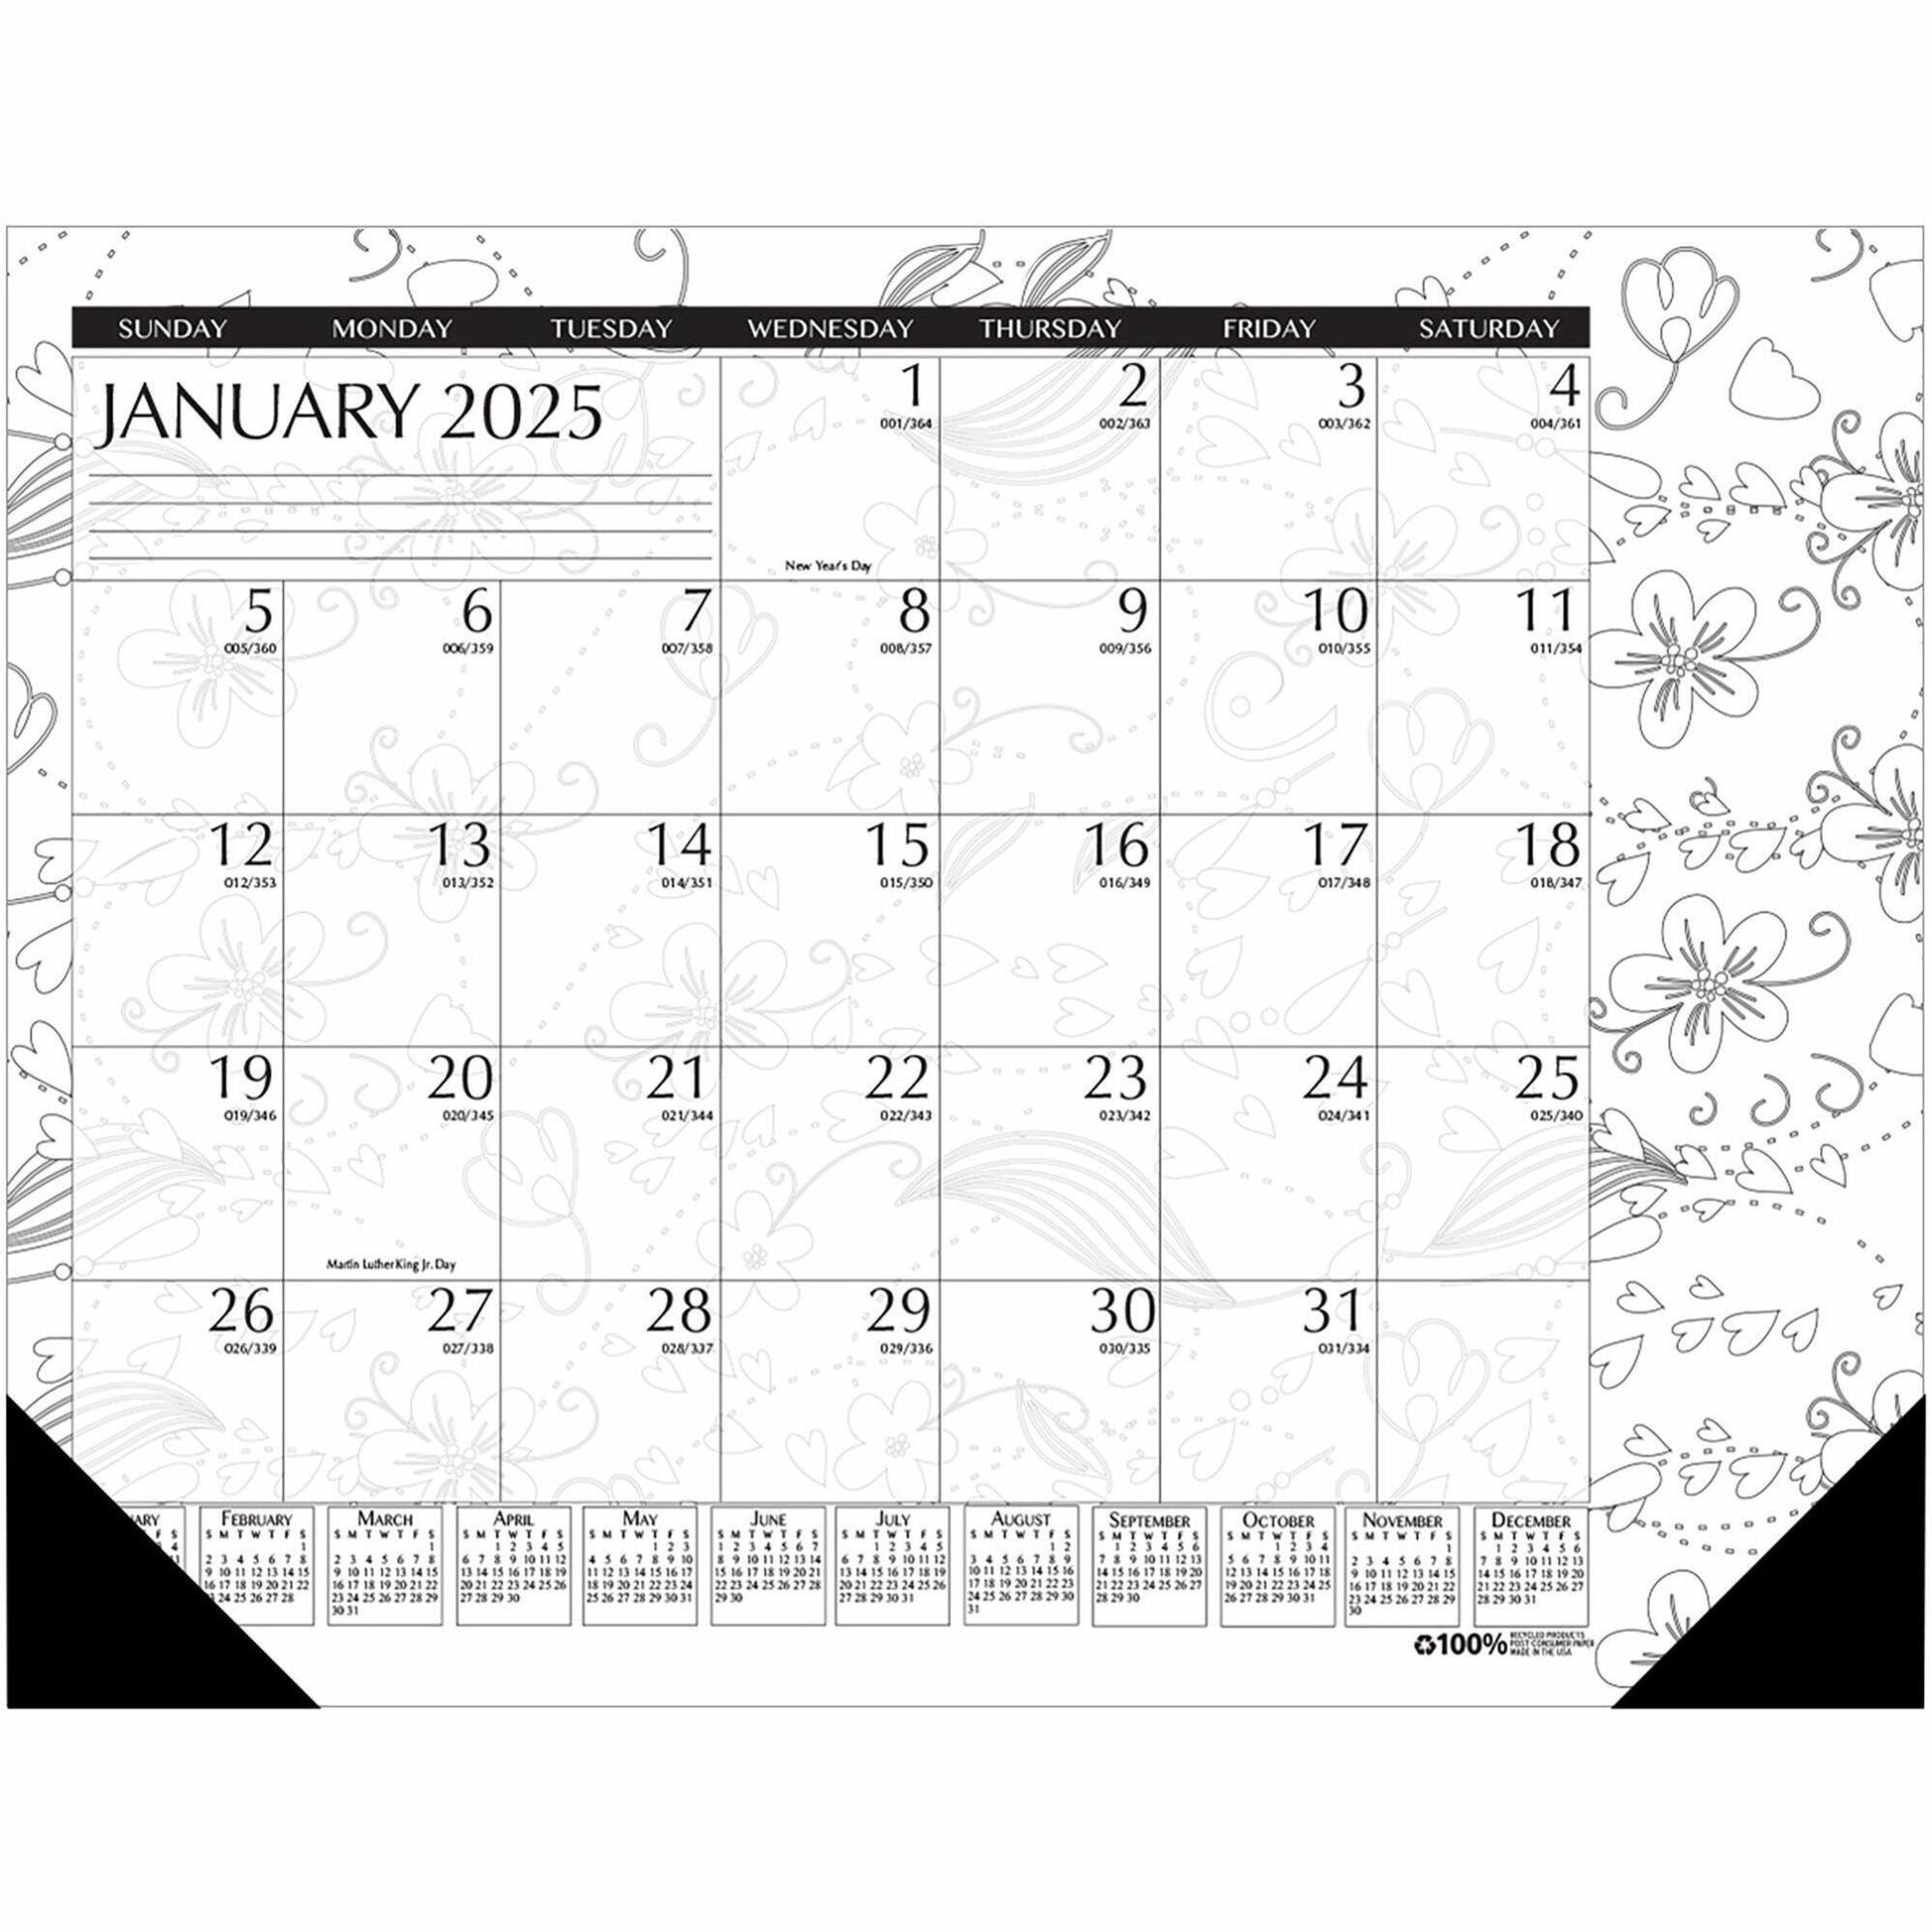 house-of-doolittle-doodle-monthly-desk-pad-julian-dates-monthly-12-month-january-2024-december-2024-1-month-single-page-layout-desk-pad-black-white-17-height-x-22-width-notes-area-reference-calendar-1-each_hod187 - 1